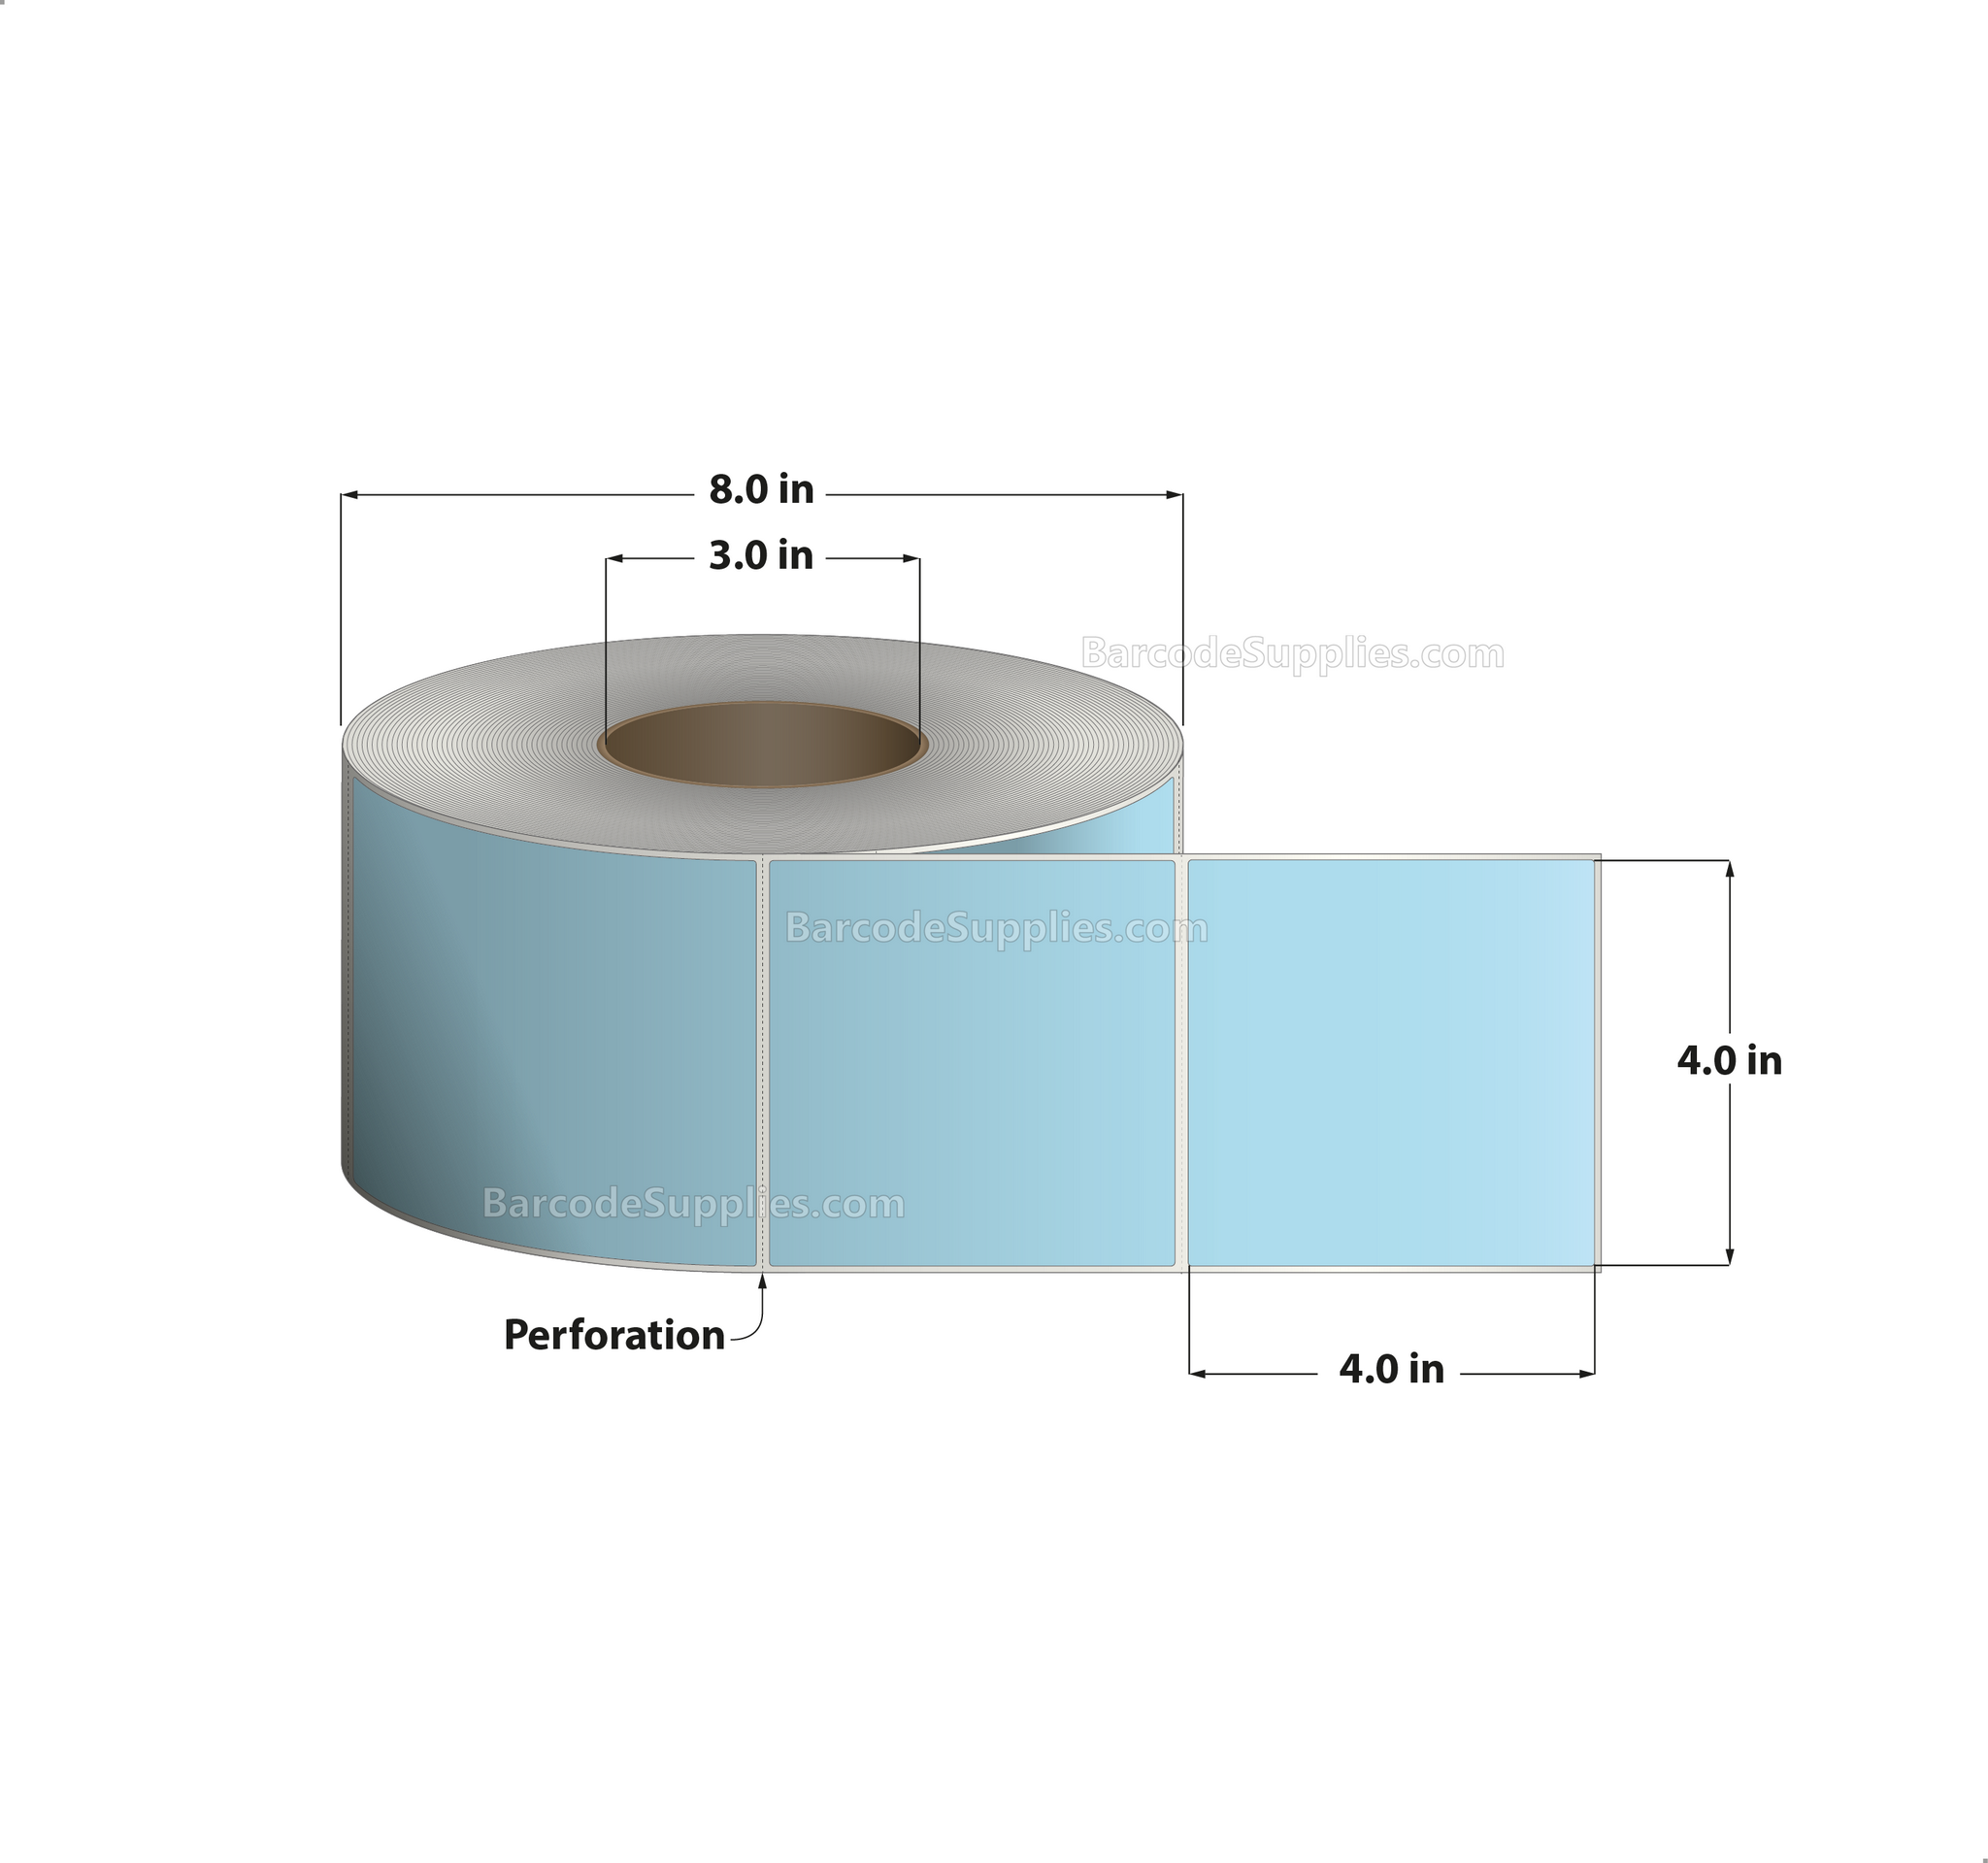 4 x 4 Thermal Transfer 290 Blue Labels With Permanent Adhesive - Perforated - 1500 Labels Per Roll - Carton Of 4 Rolls - 6000 Labels Total - MPN: RFC-4-4-1500-BL